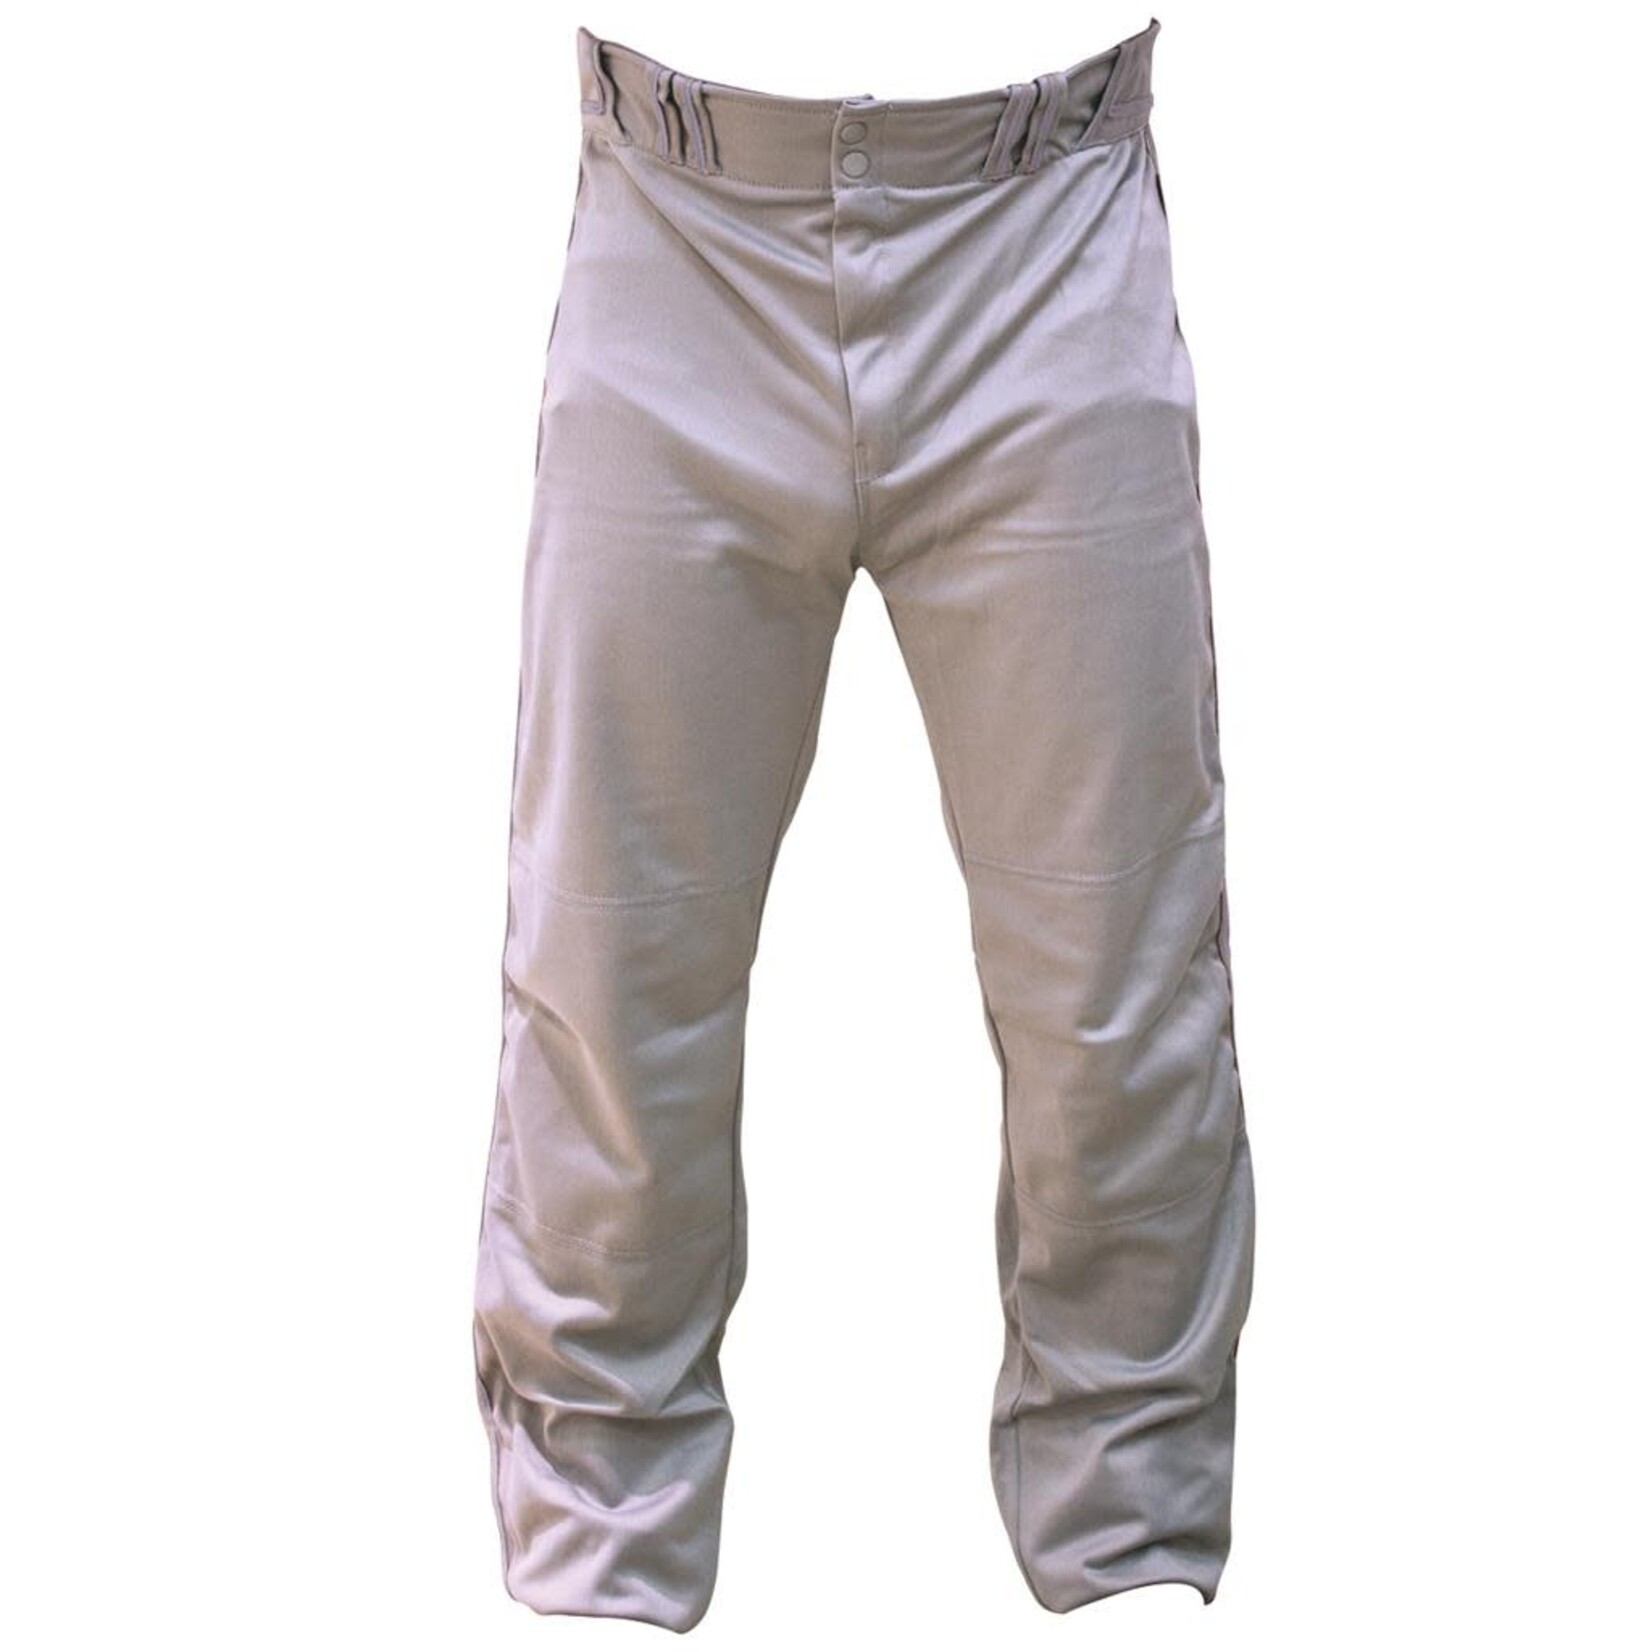 Louisville LOUISVILLE STOCK PANT GREY WITH PIPING JR